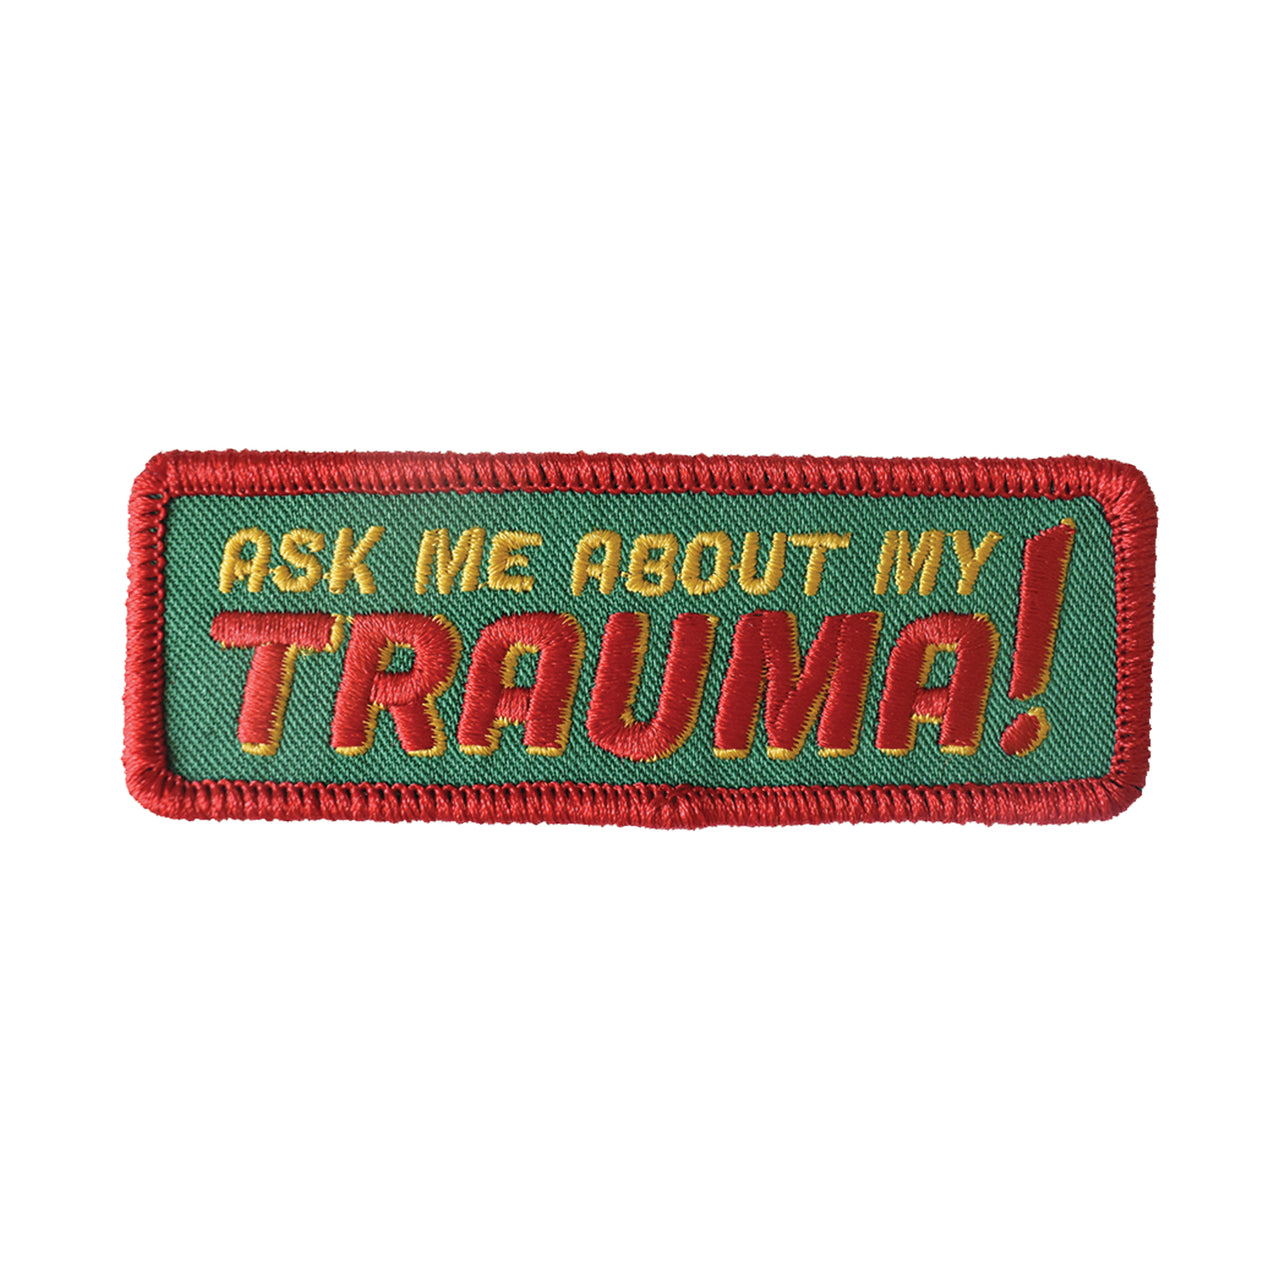 Ask Me About My Trauma (Iron-On Patch)